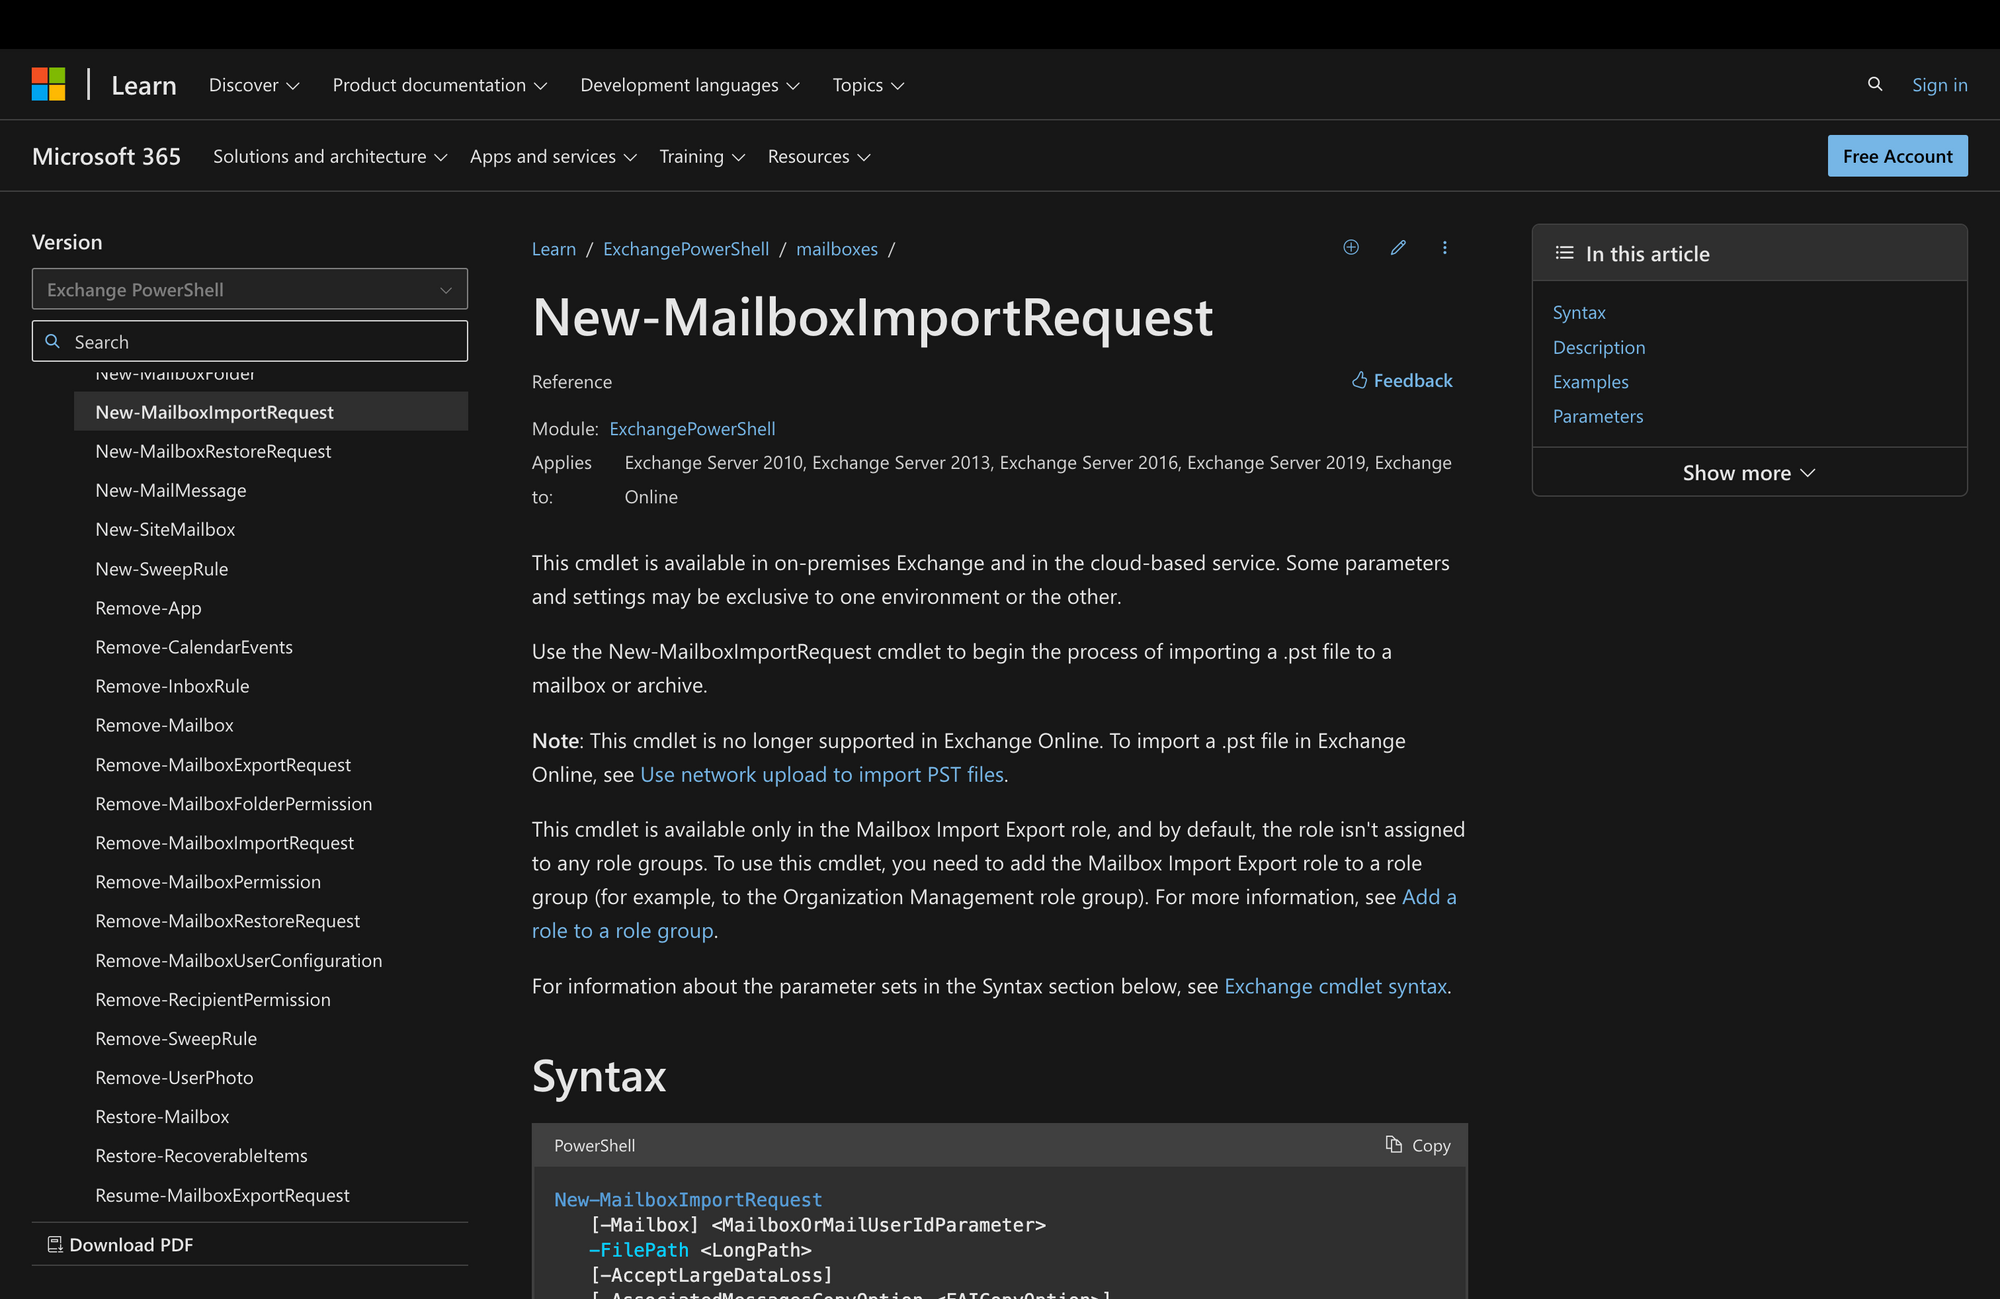 How to Use New-MailboxImportRequest in Powershell